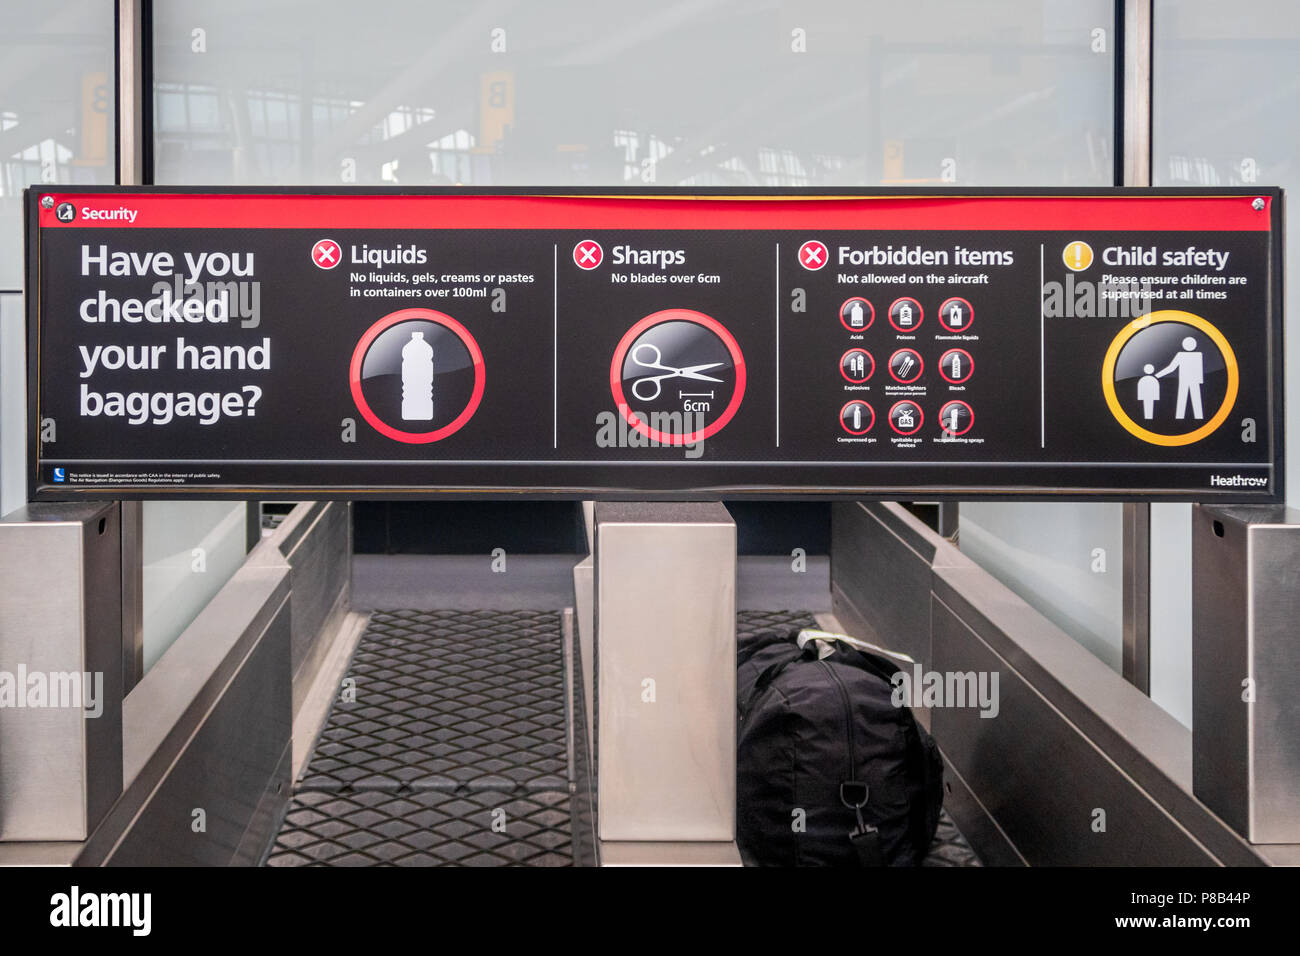 Heathrow Airport security sign showing forbidden hand luggage items Stock Photo